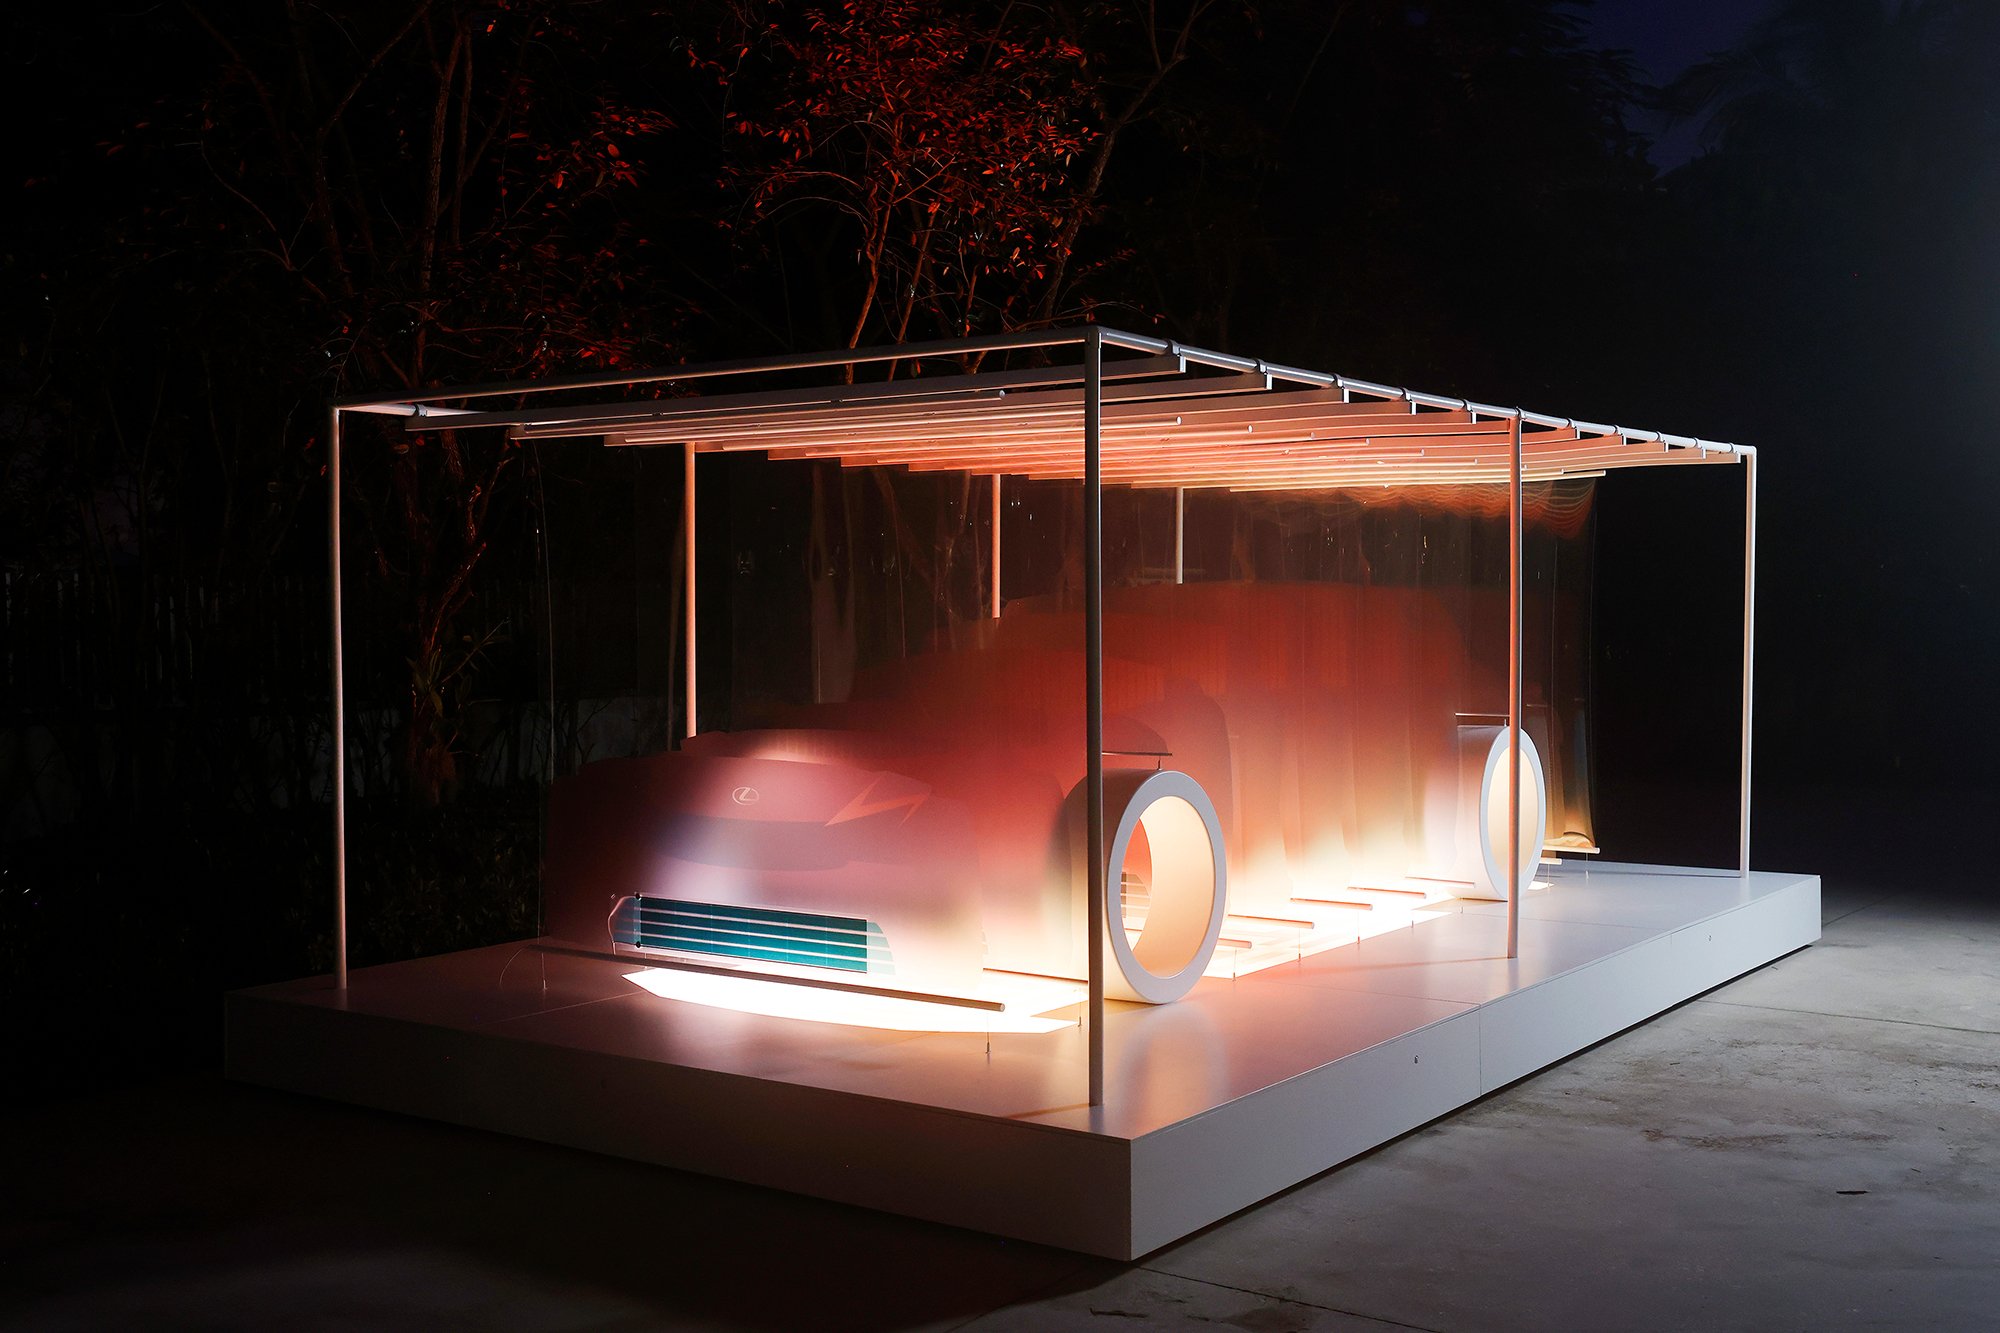 Lexus collaborates with designer Marjan van Aubel for an interactive installation inspired by carbon-neutral energy and Lexus concept car